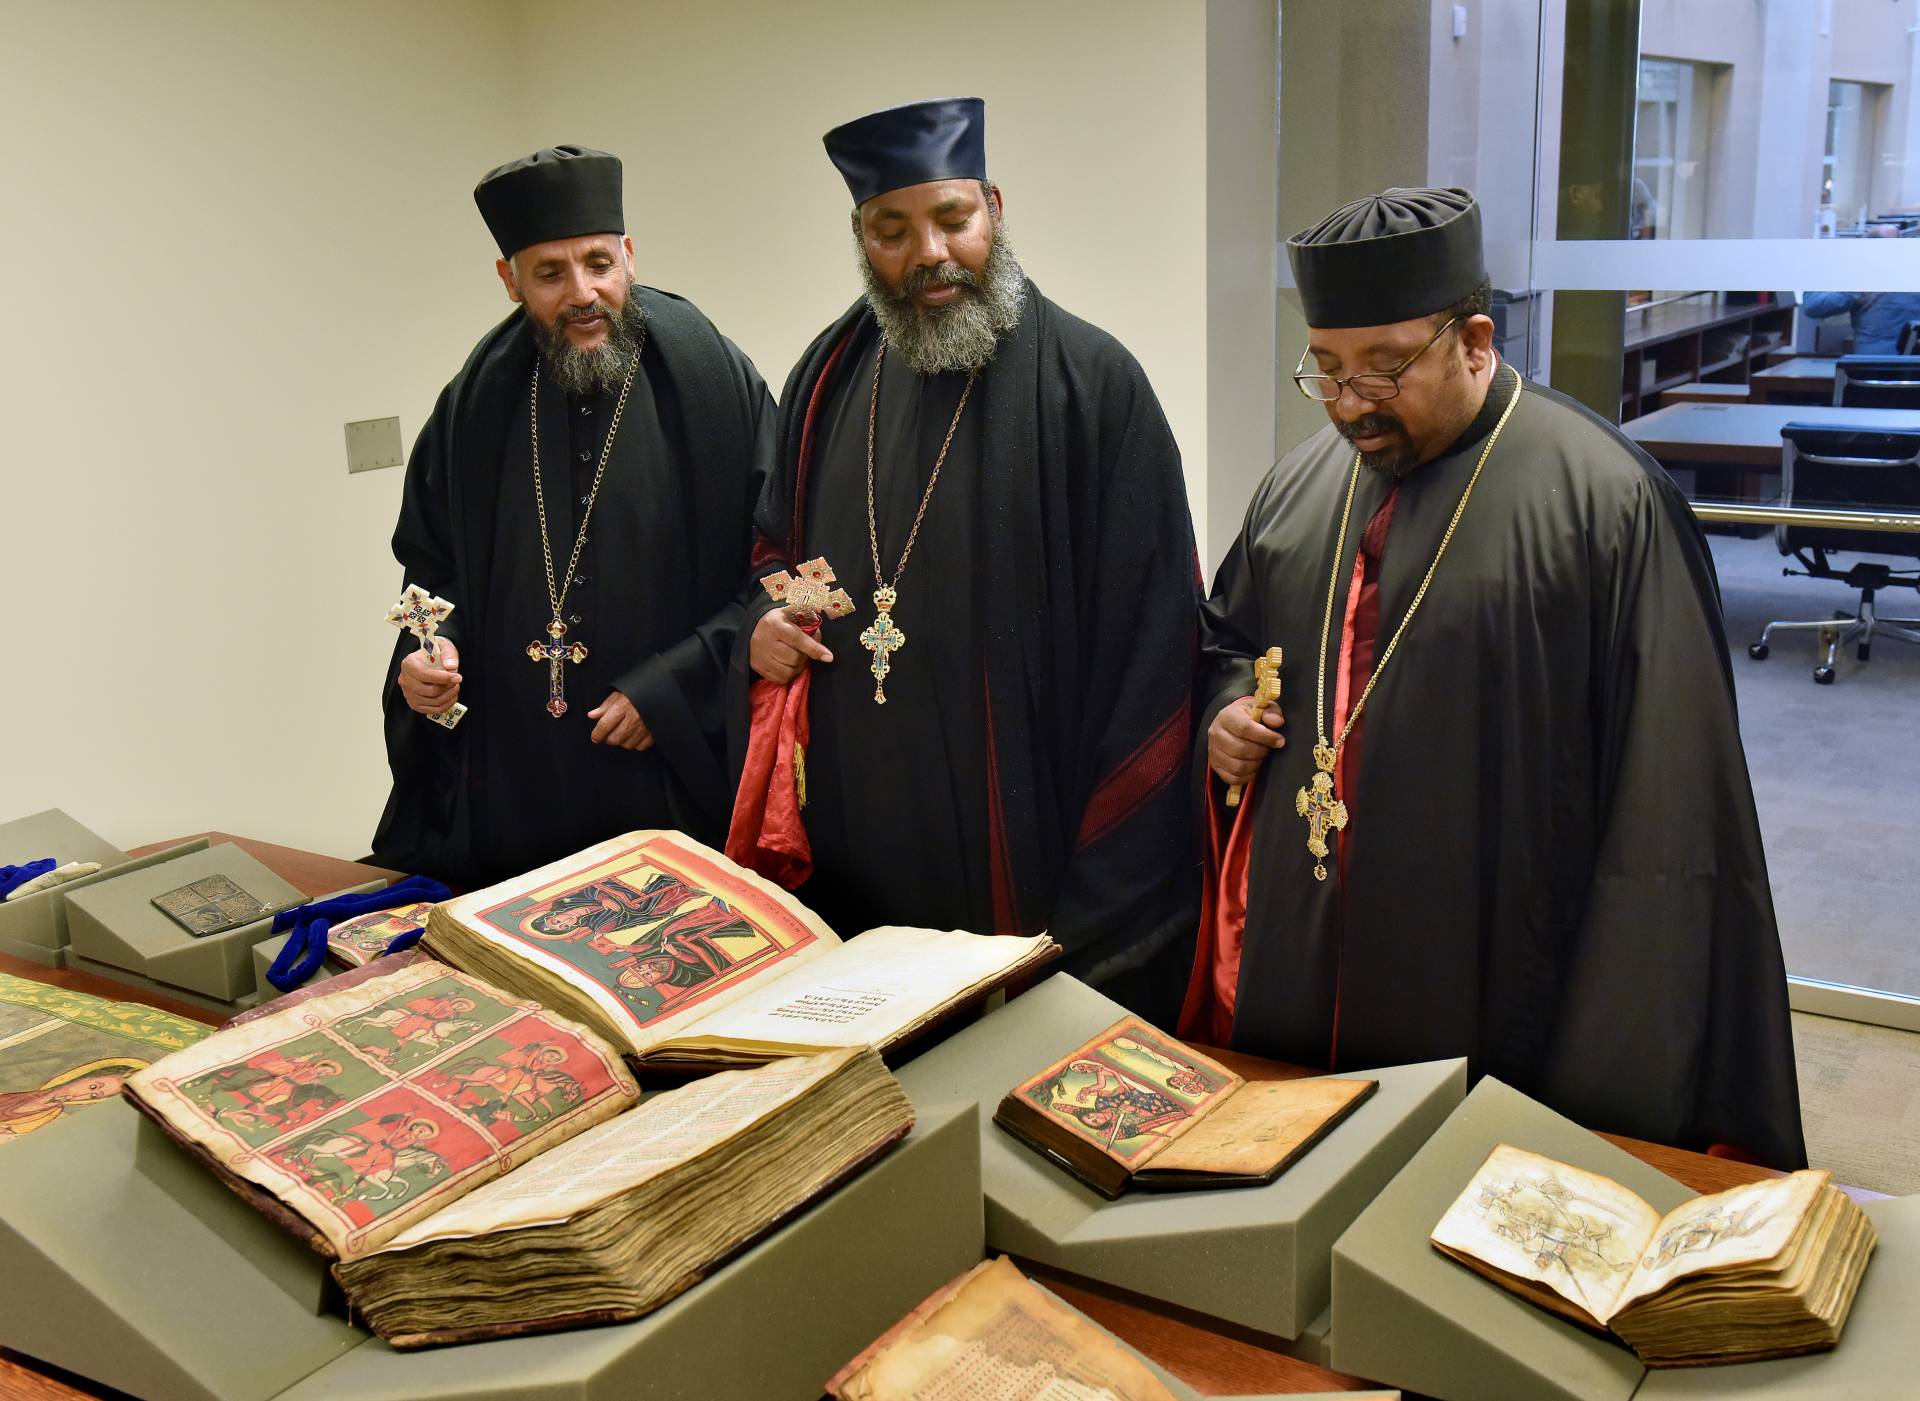 Three visiting priests looking at/discussing a manuscript on a table display